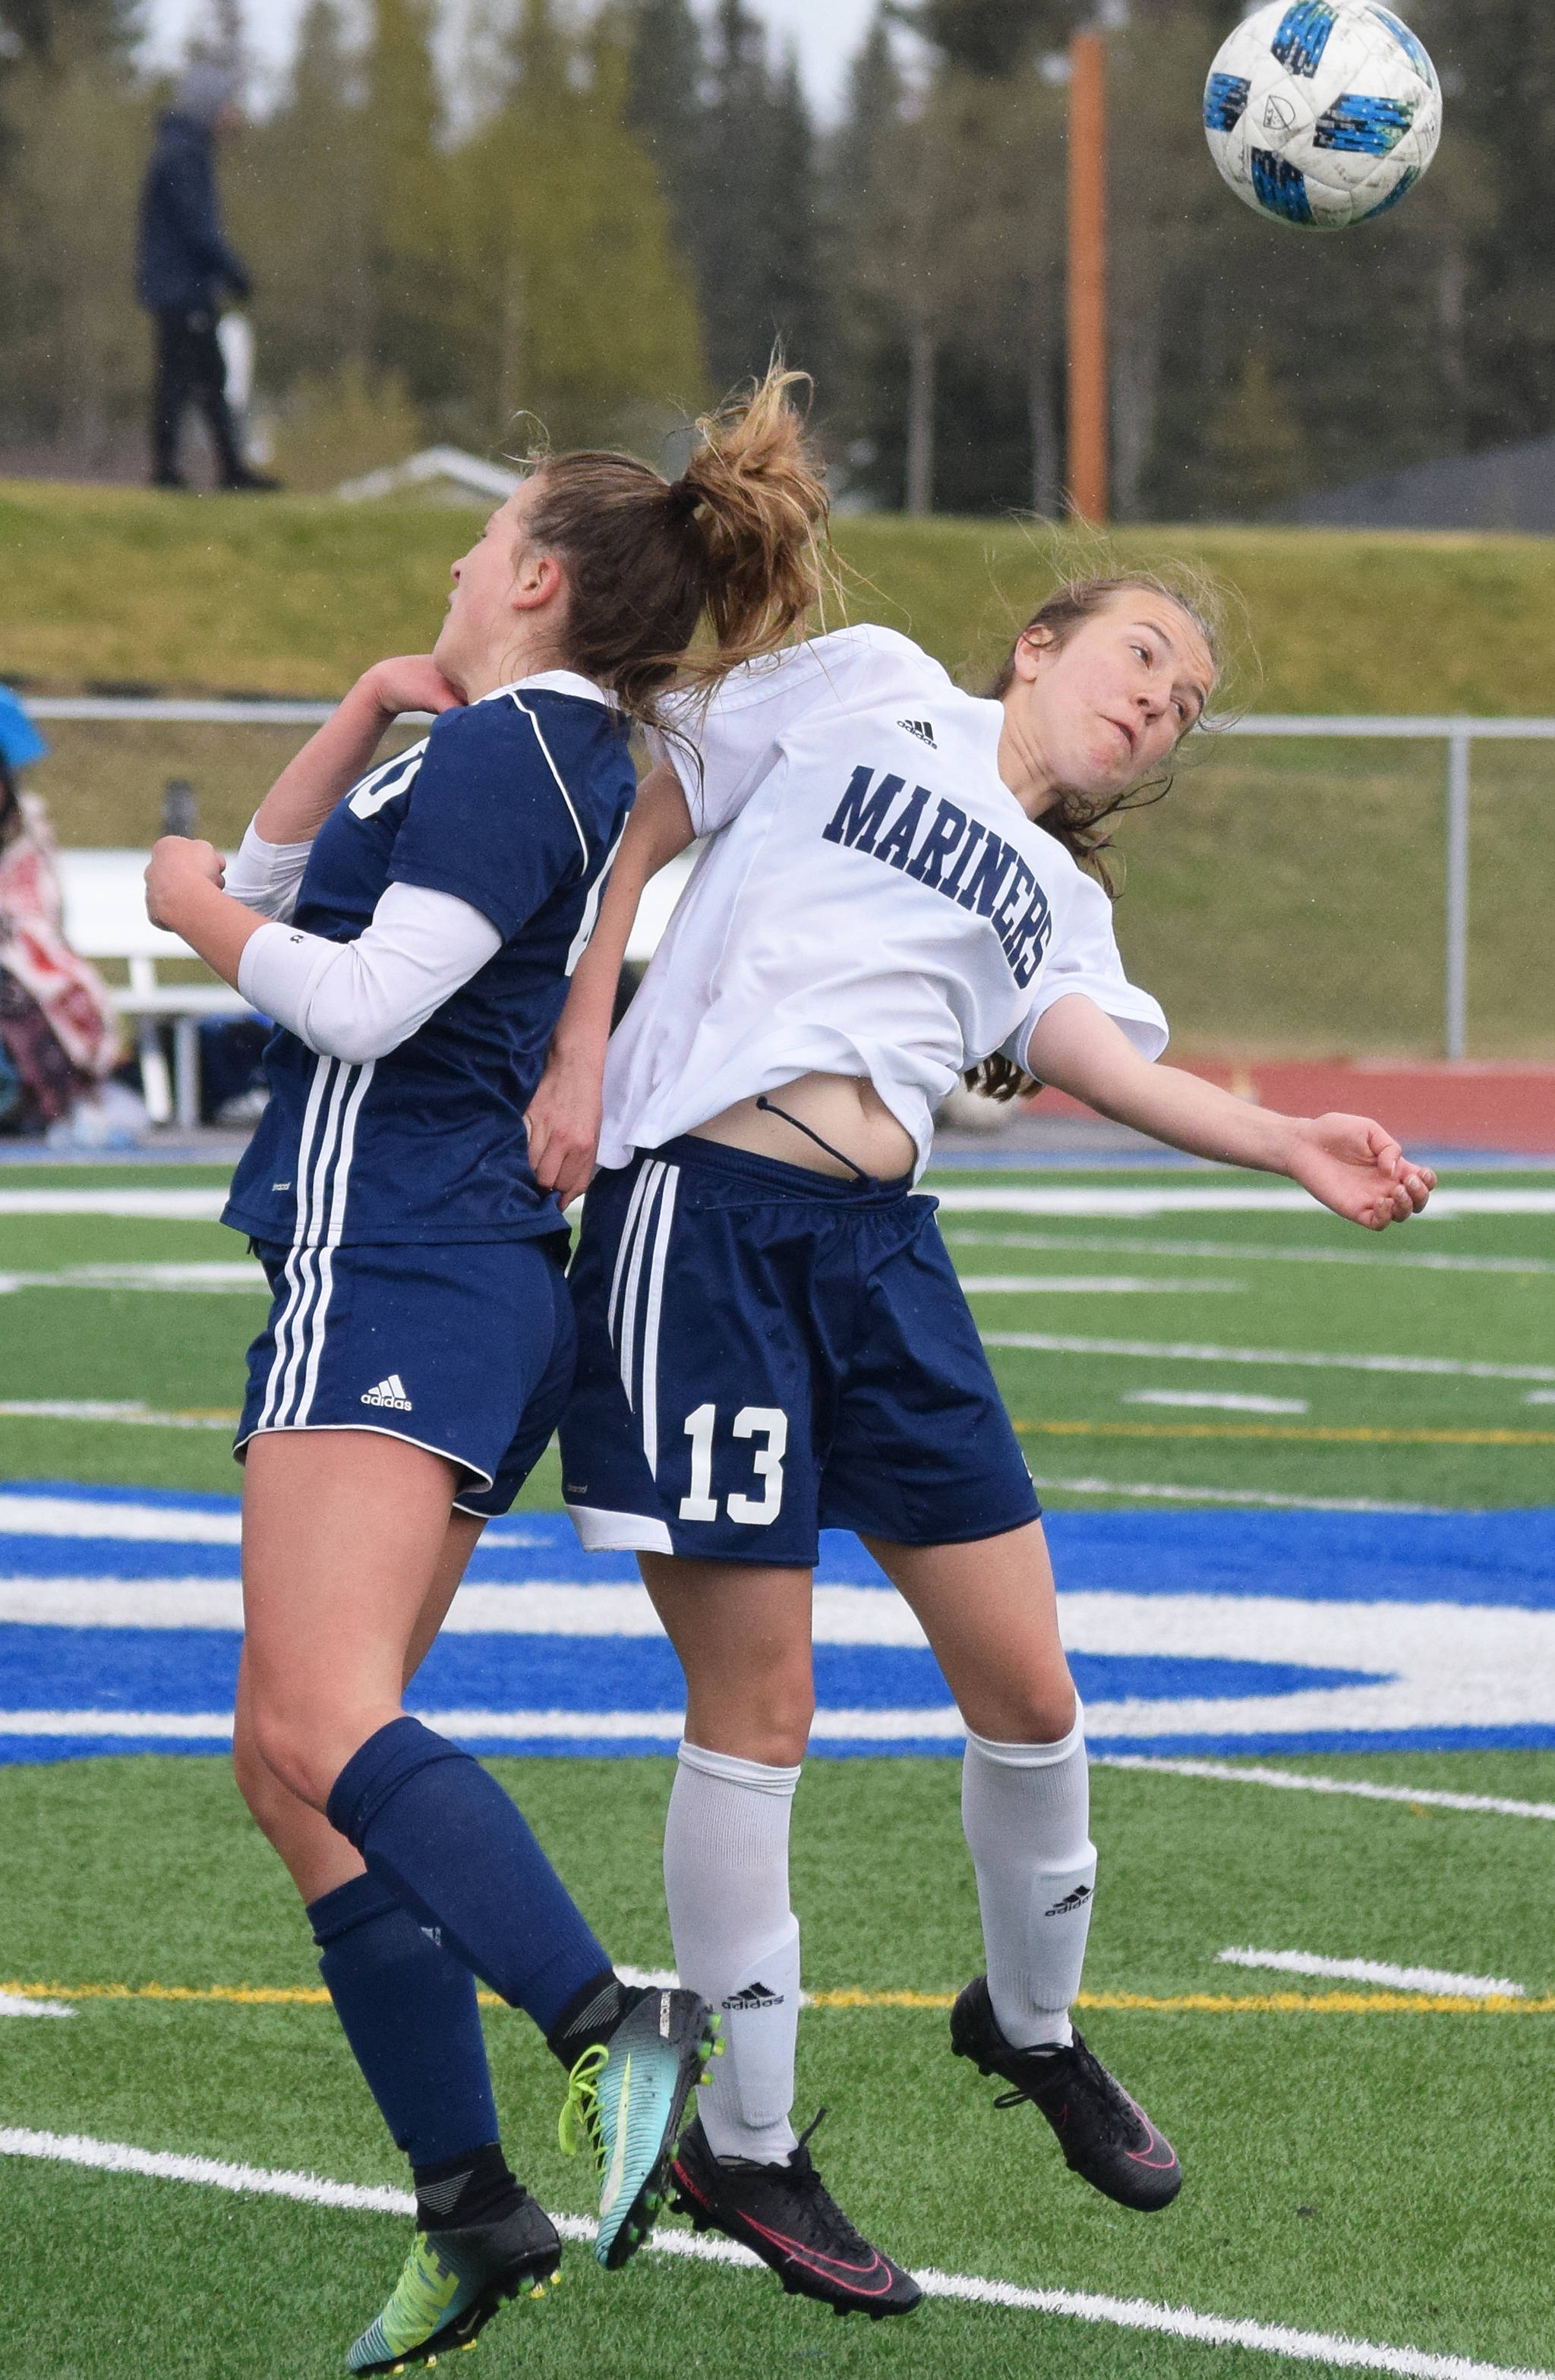 Homer’s Kappa Reutov (13) and Soldotna’s Ryann Cannava jump up for a header Saturday, May 11, 2019, in a Peninsula Conference game in Soldotna, Alaska. (Photo by Joey Klecka/Peninsula Clarion)